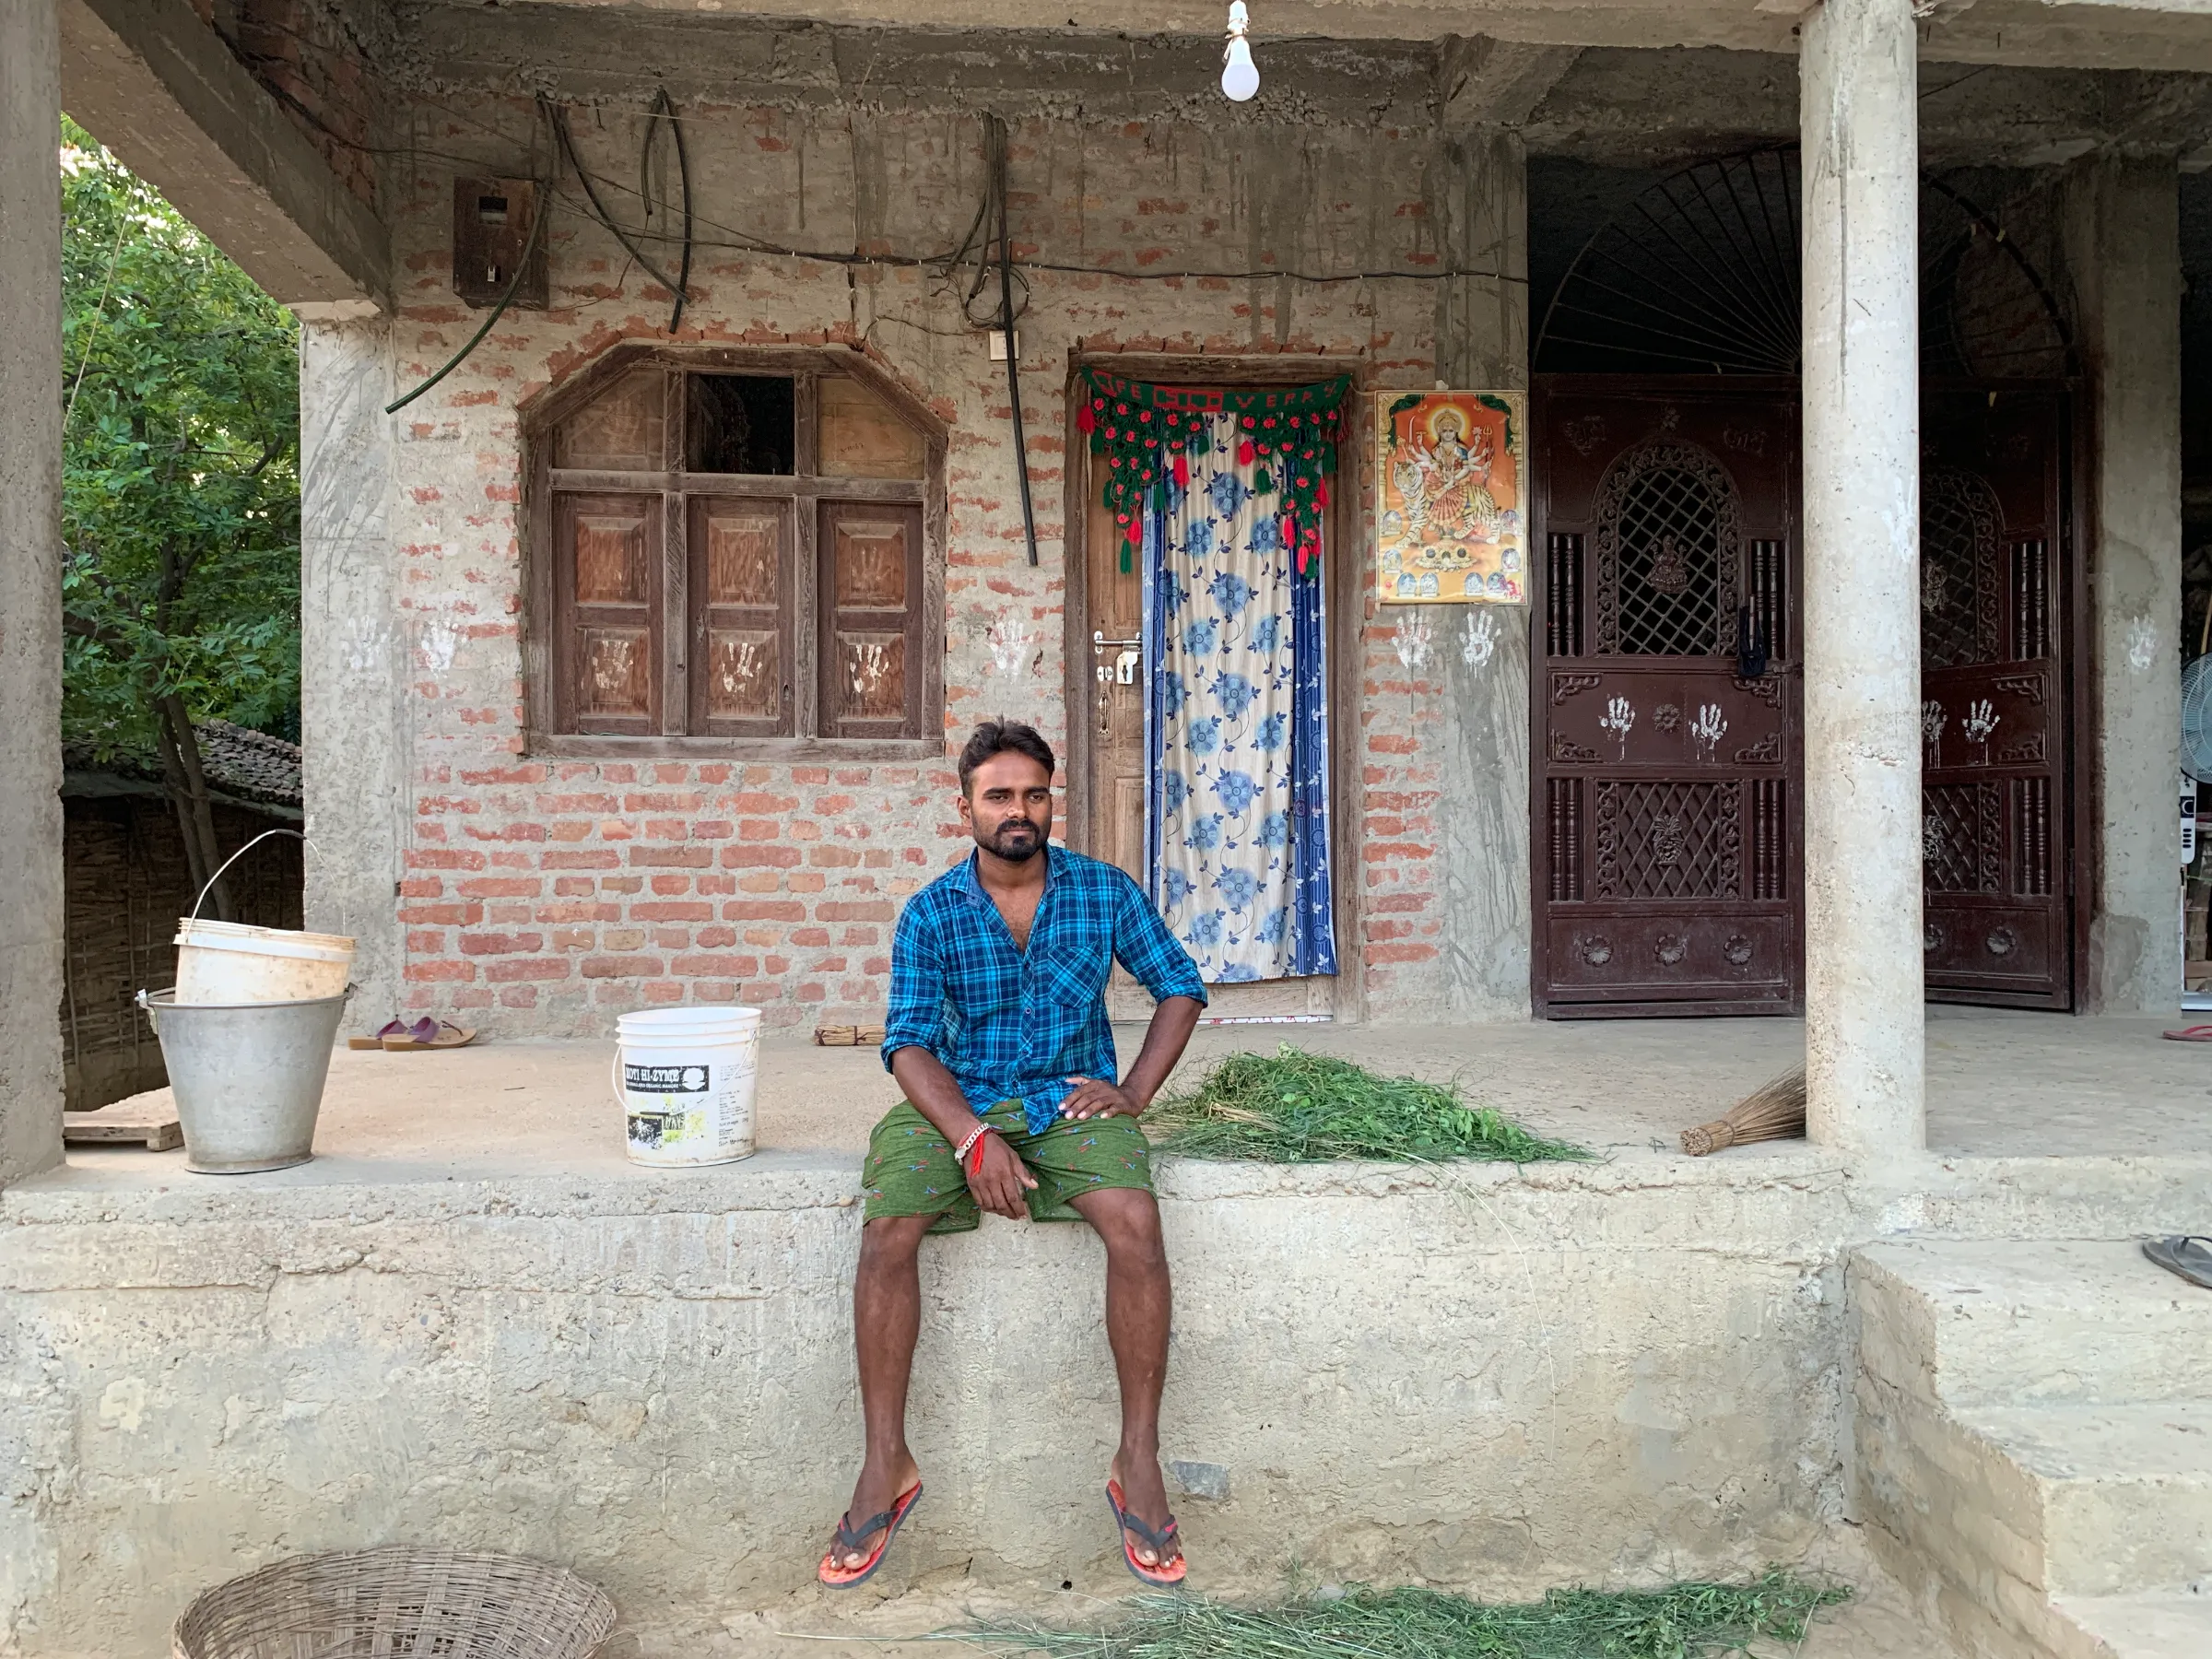 Santosh Kumar Yadav poses for a picture outside his newly built home in Barmajhiya, Nepal, August 25, 2022. Thomson Reuters Foundation/Pramod Acharya